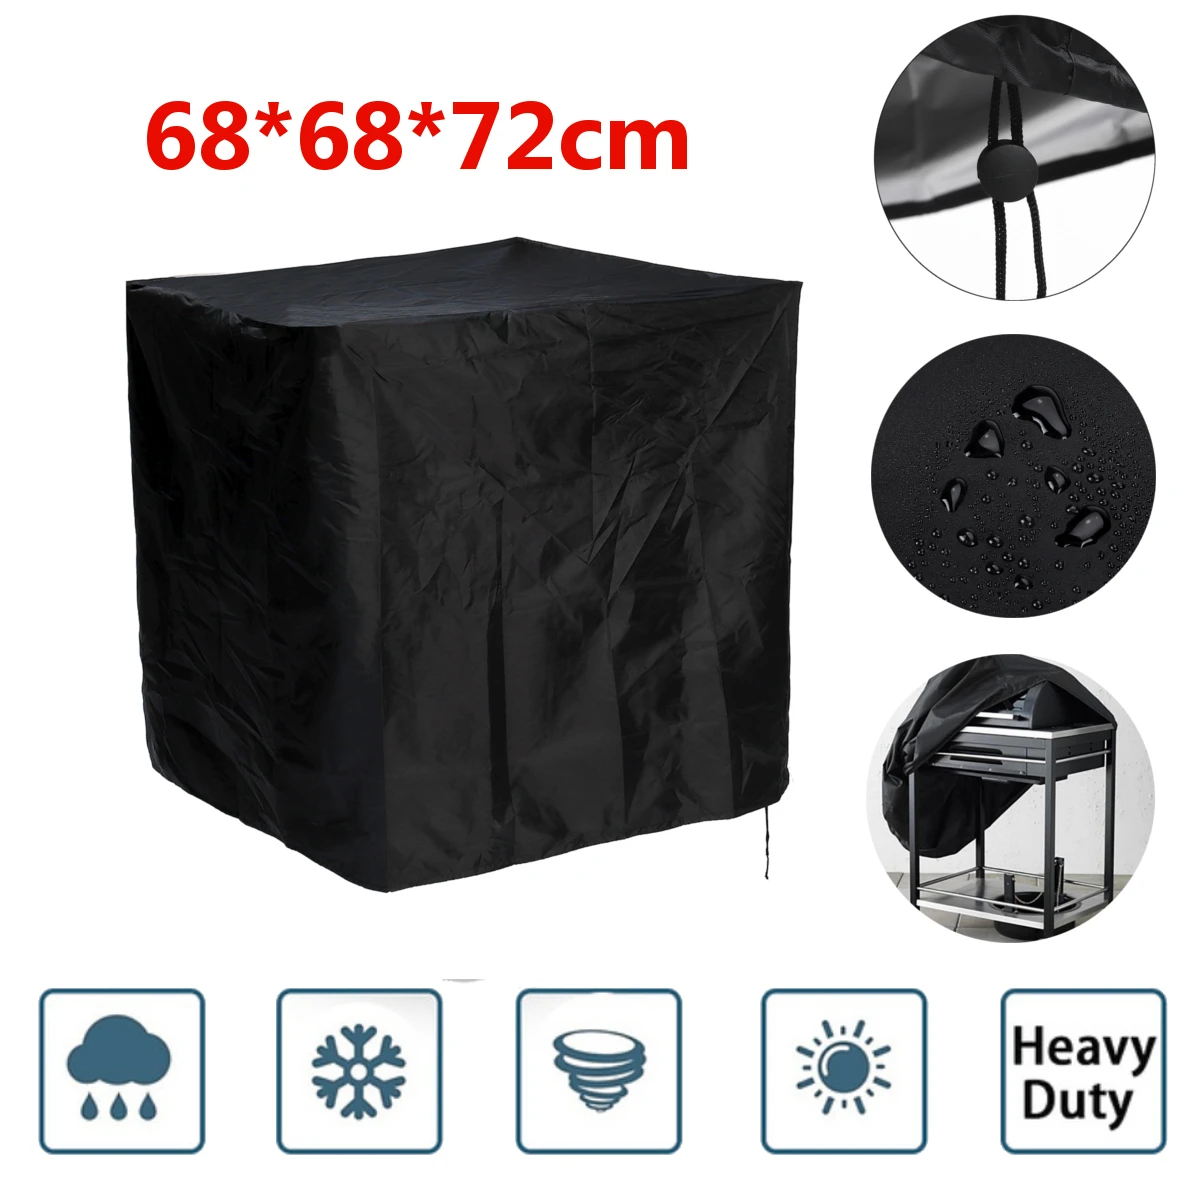 BBQ Rack Waterproof Covers Outdoor Garden Patio Barbeque Grill Protect  68cm